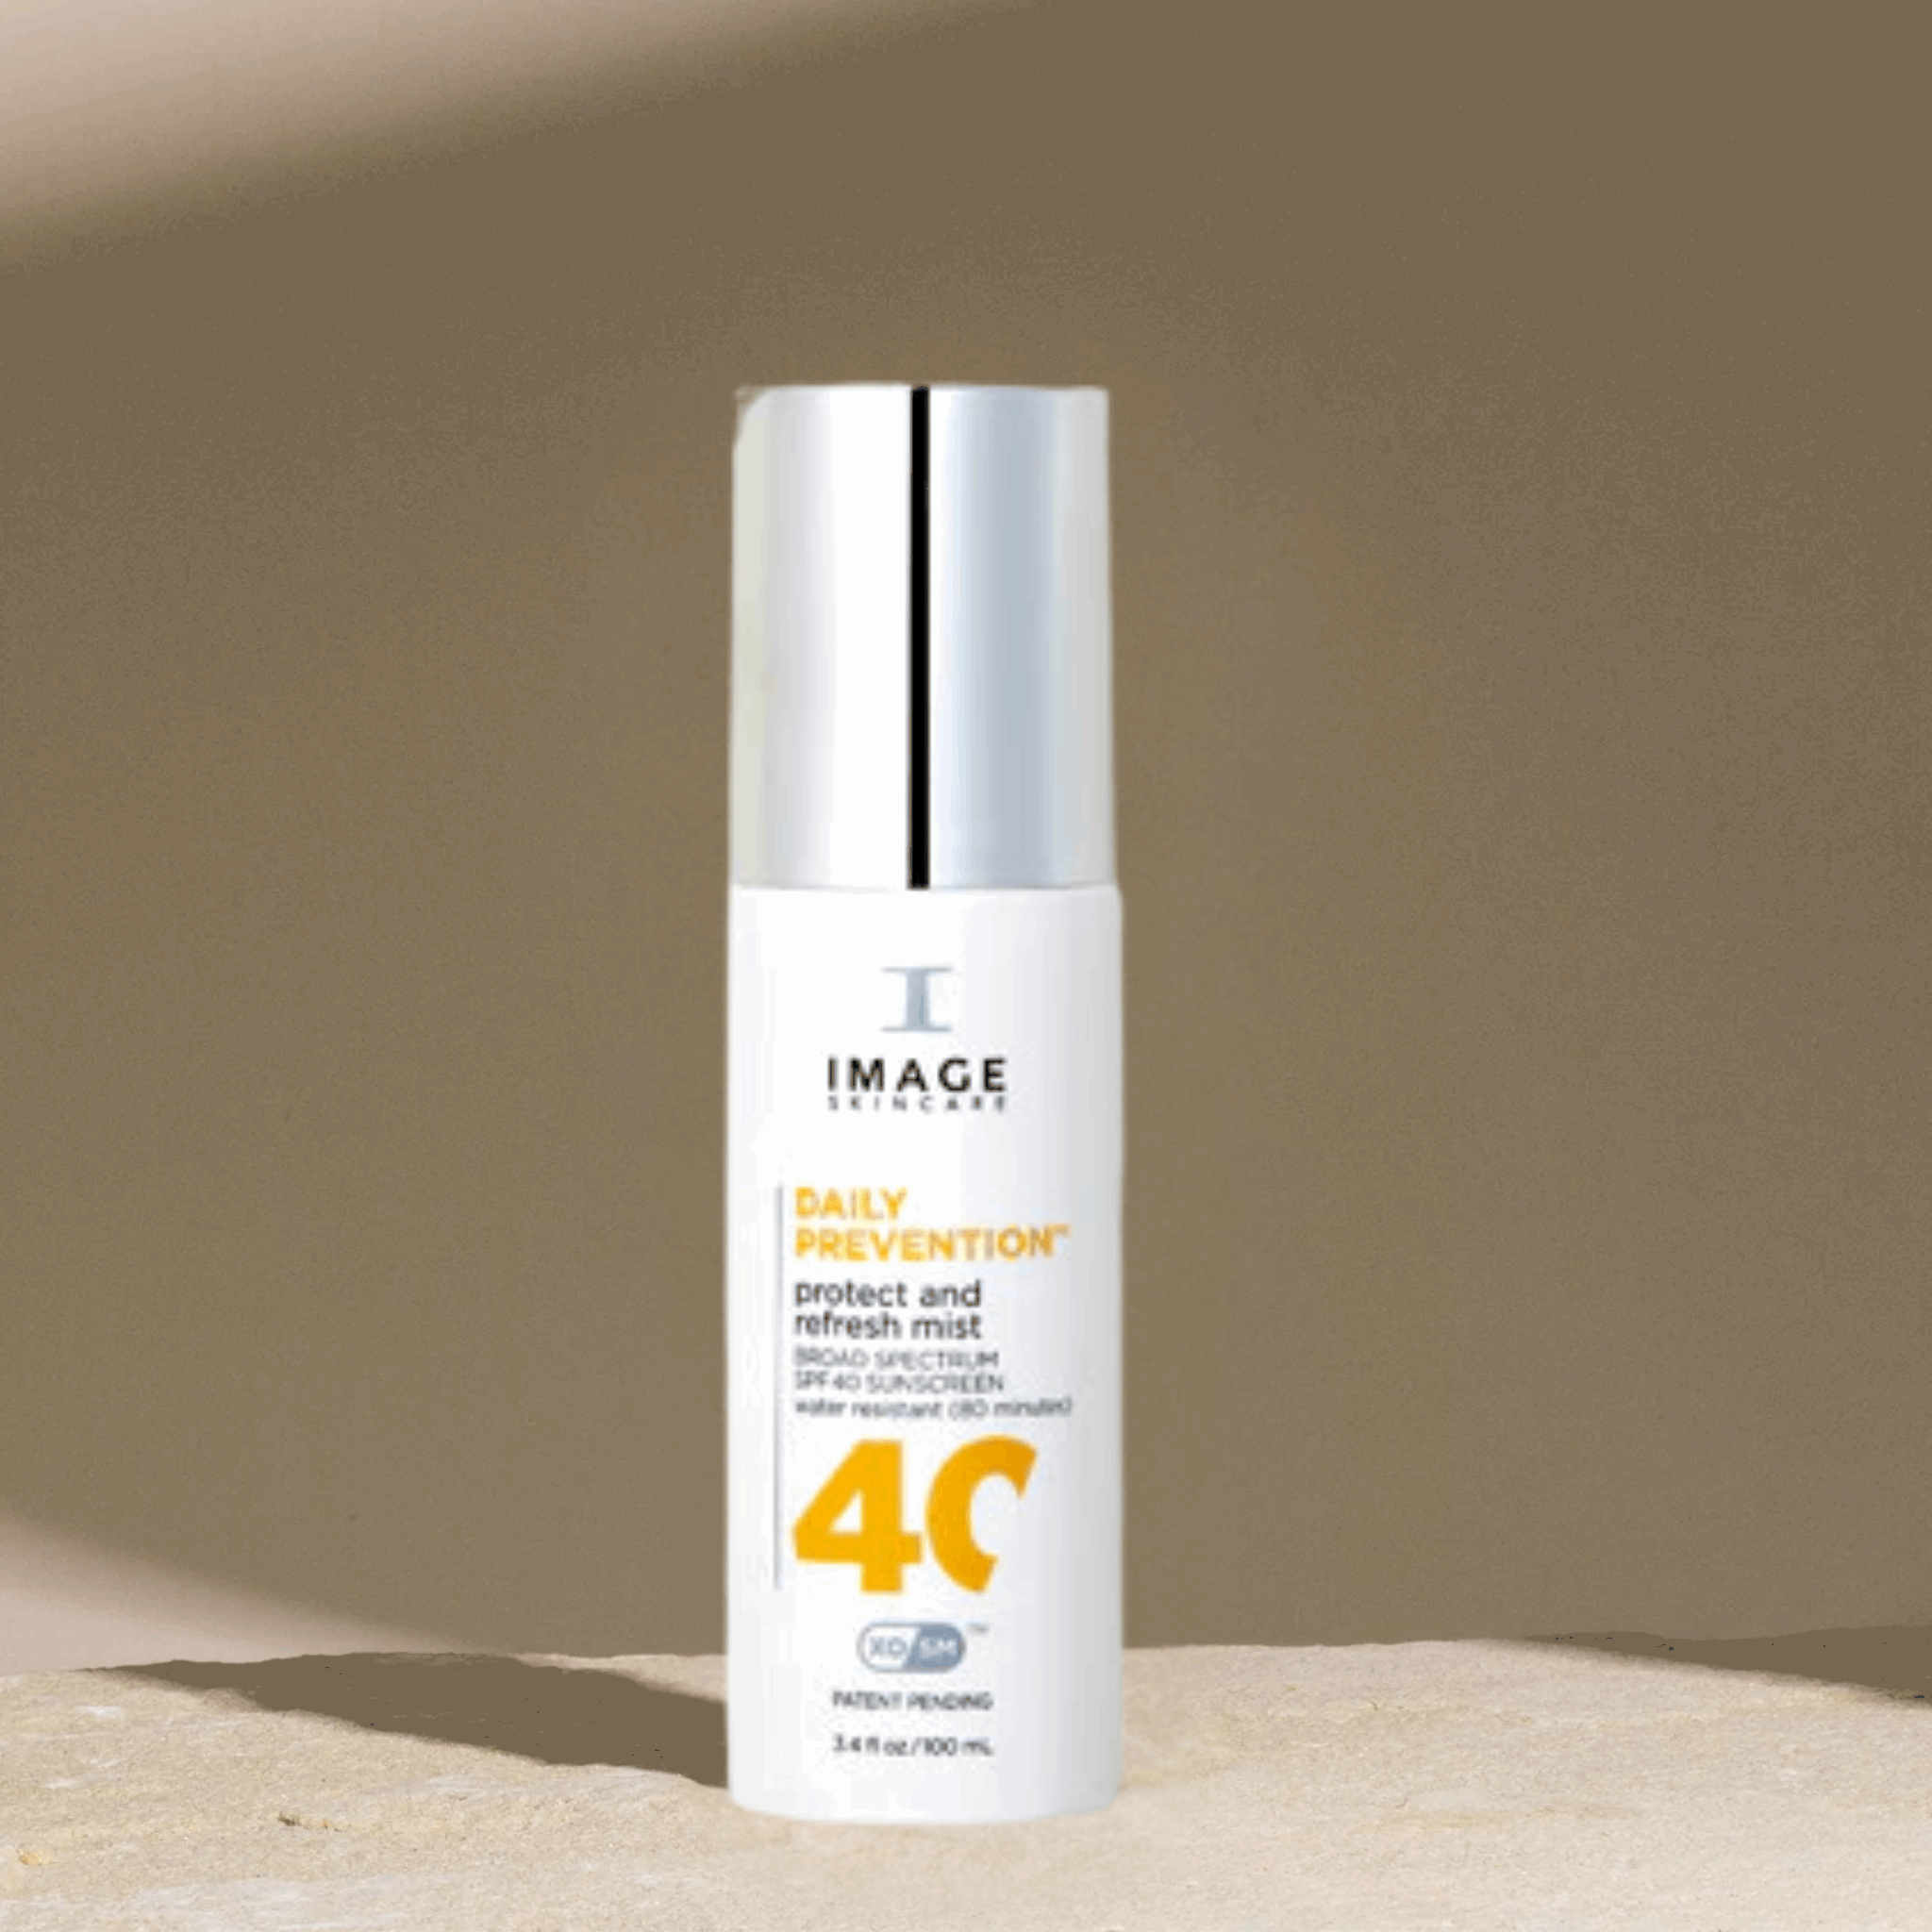 DAILY PREVENTION Protect and Refresh Mist SPF 40 Image Skincare